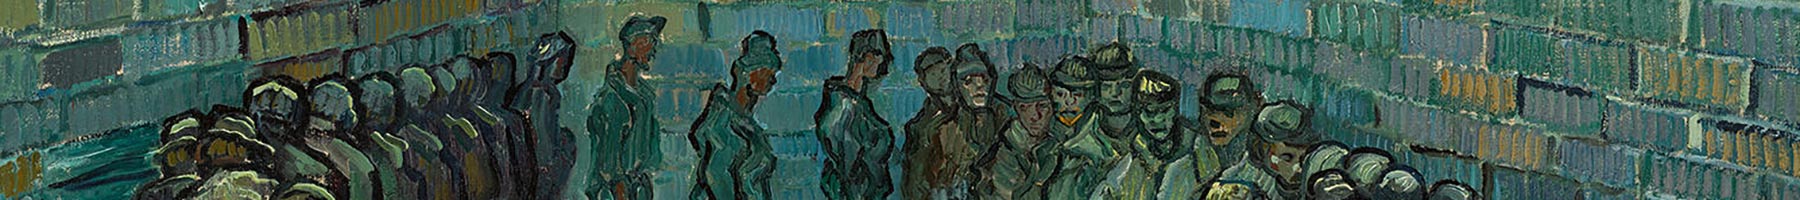 a painting of prisoners exercising in a prison yard